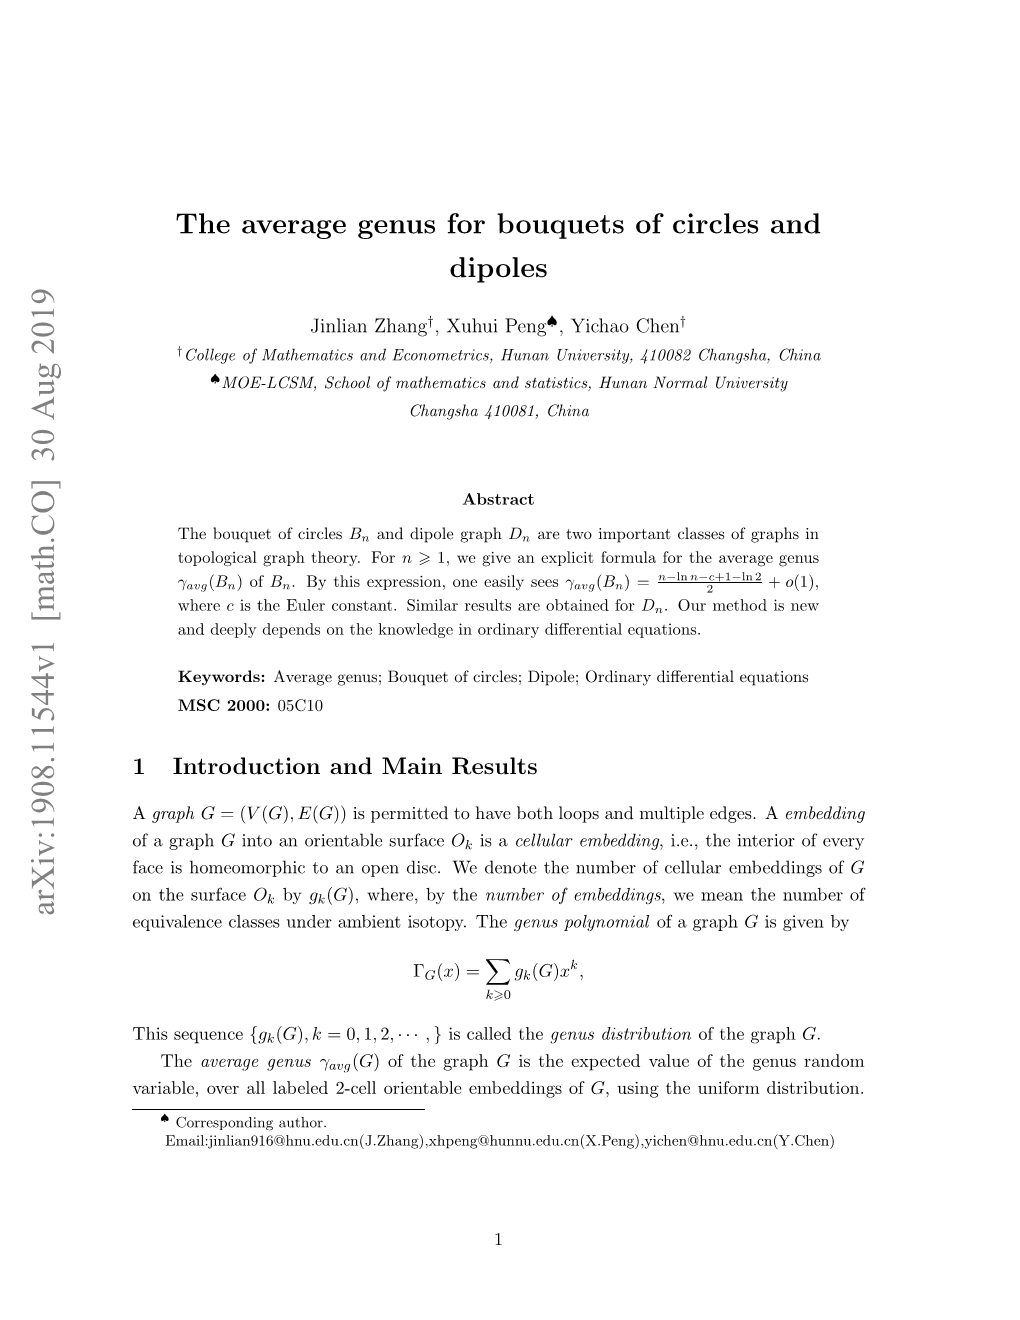 The Average Genus for Bouquets of Circles and Dipoles